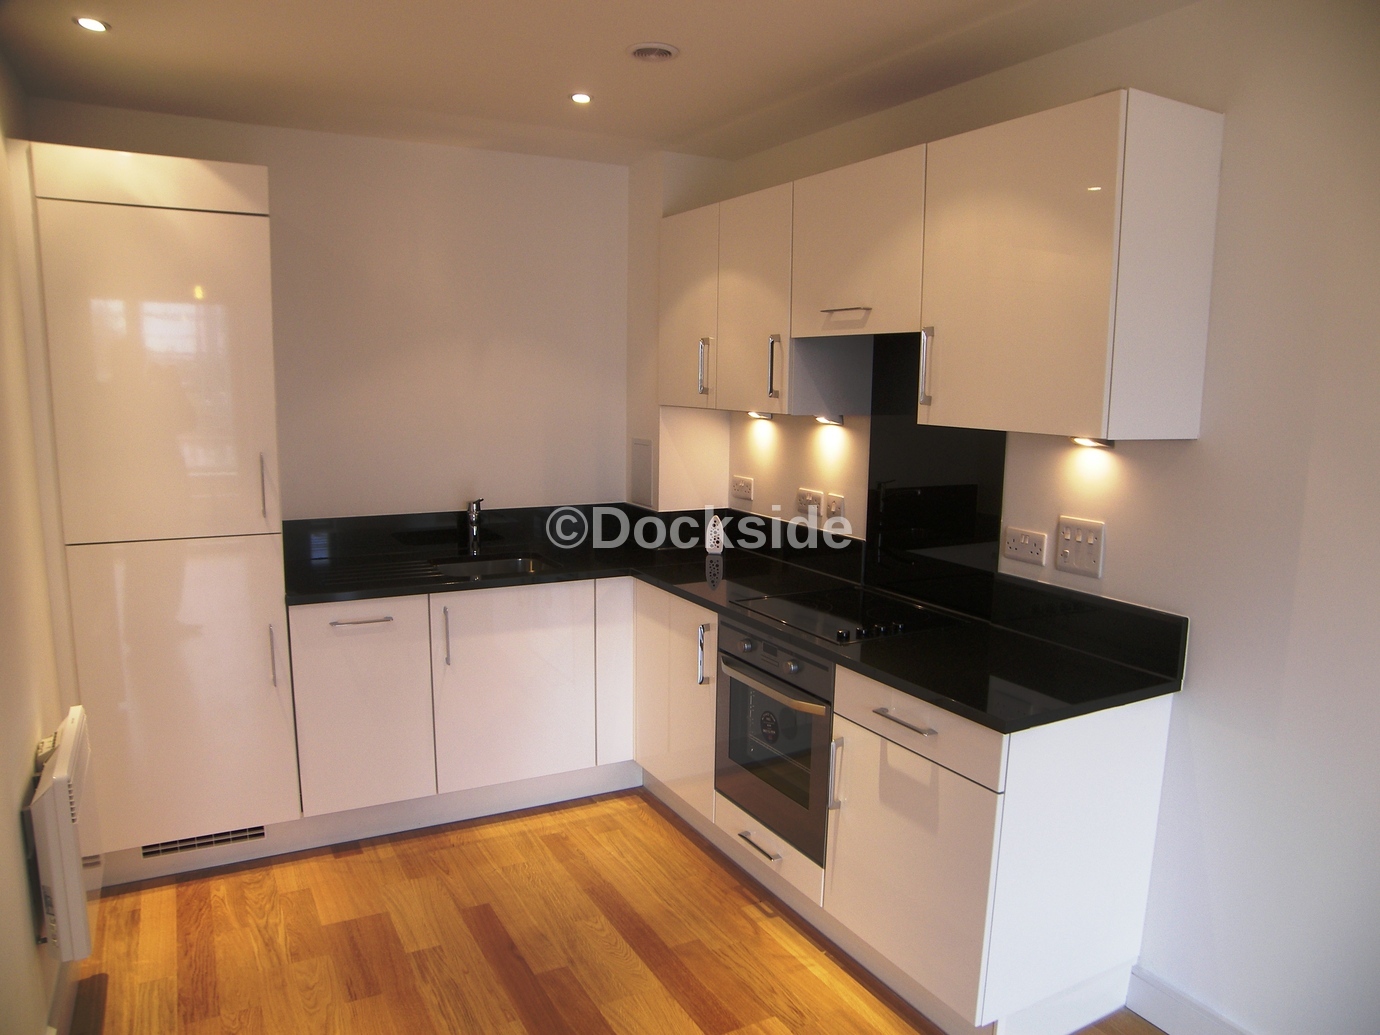 1 bed to rent in Dock Head Road, Chatham 1